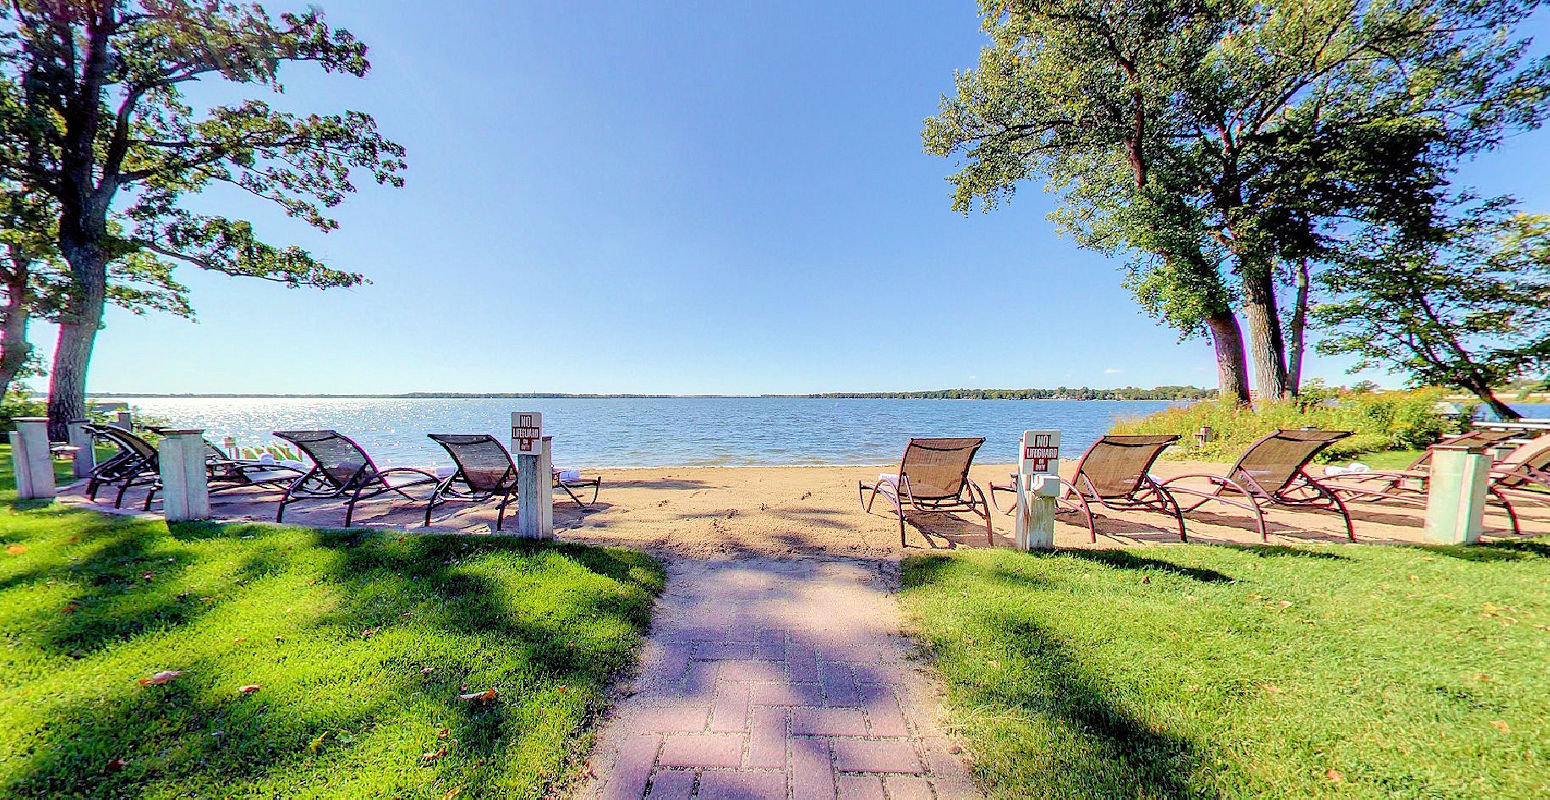 Beautiful morning before folks hit the lounge chairs on the private sandy beach at the Lodge on Lake Detroit